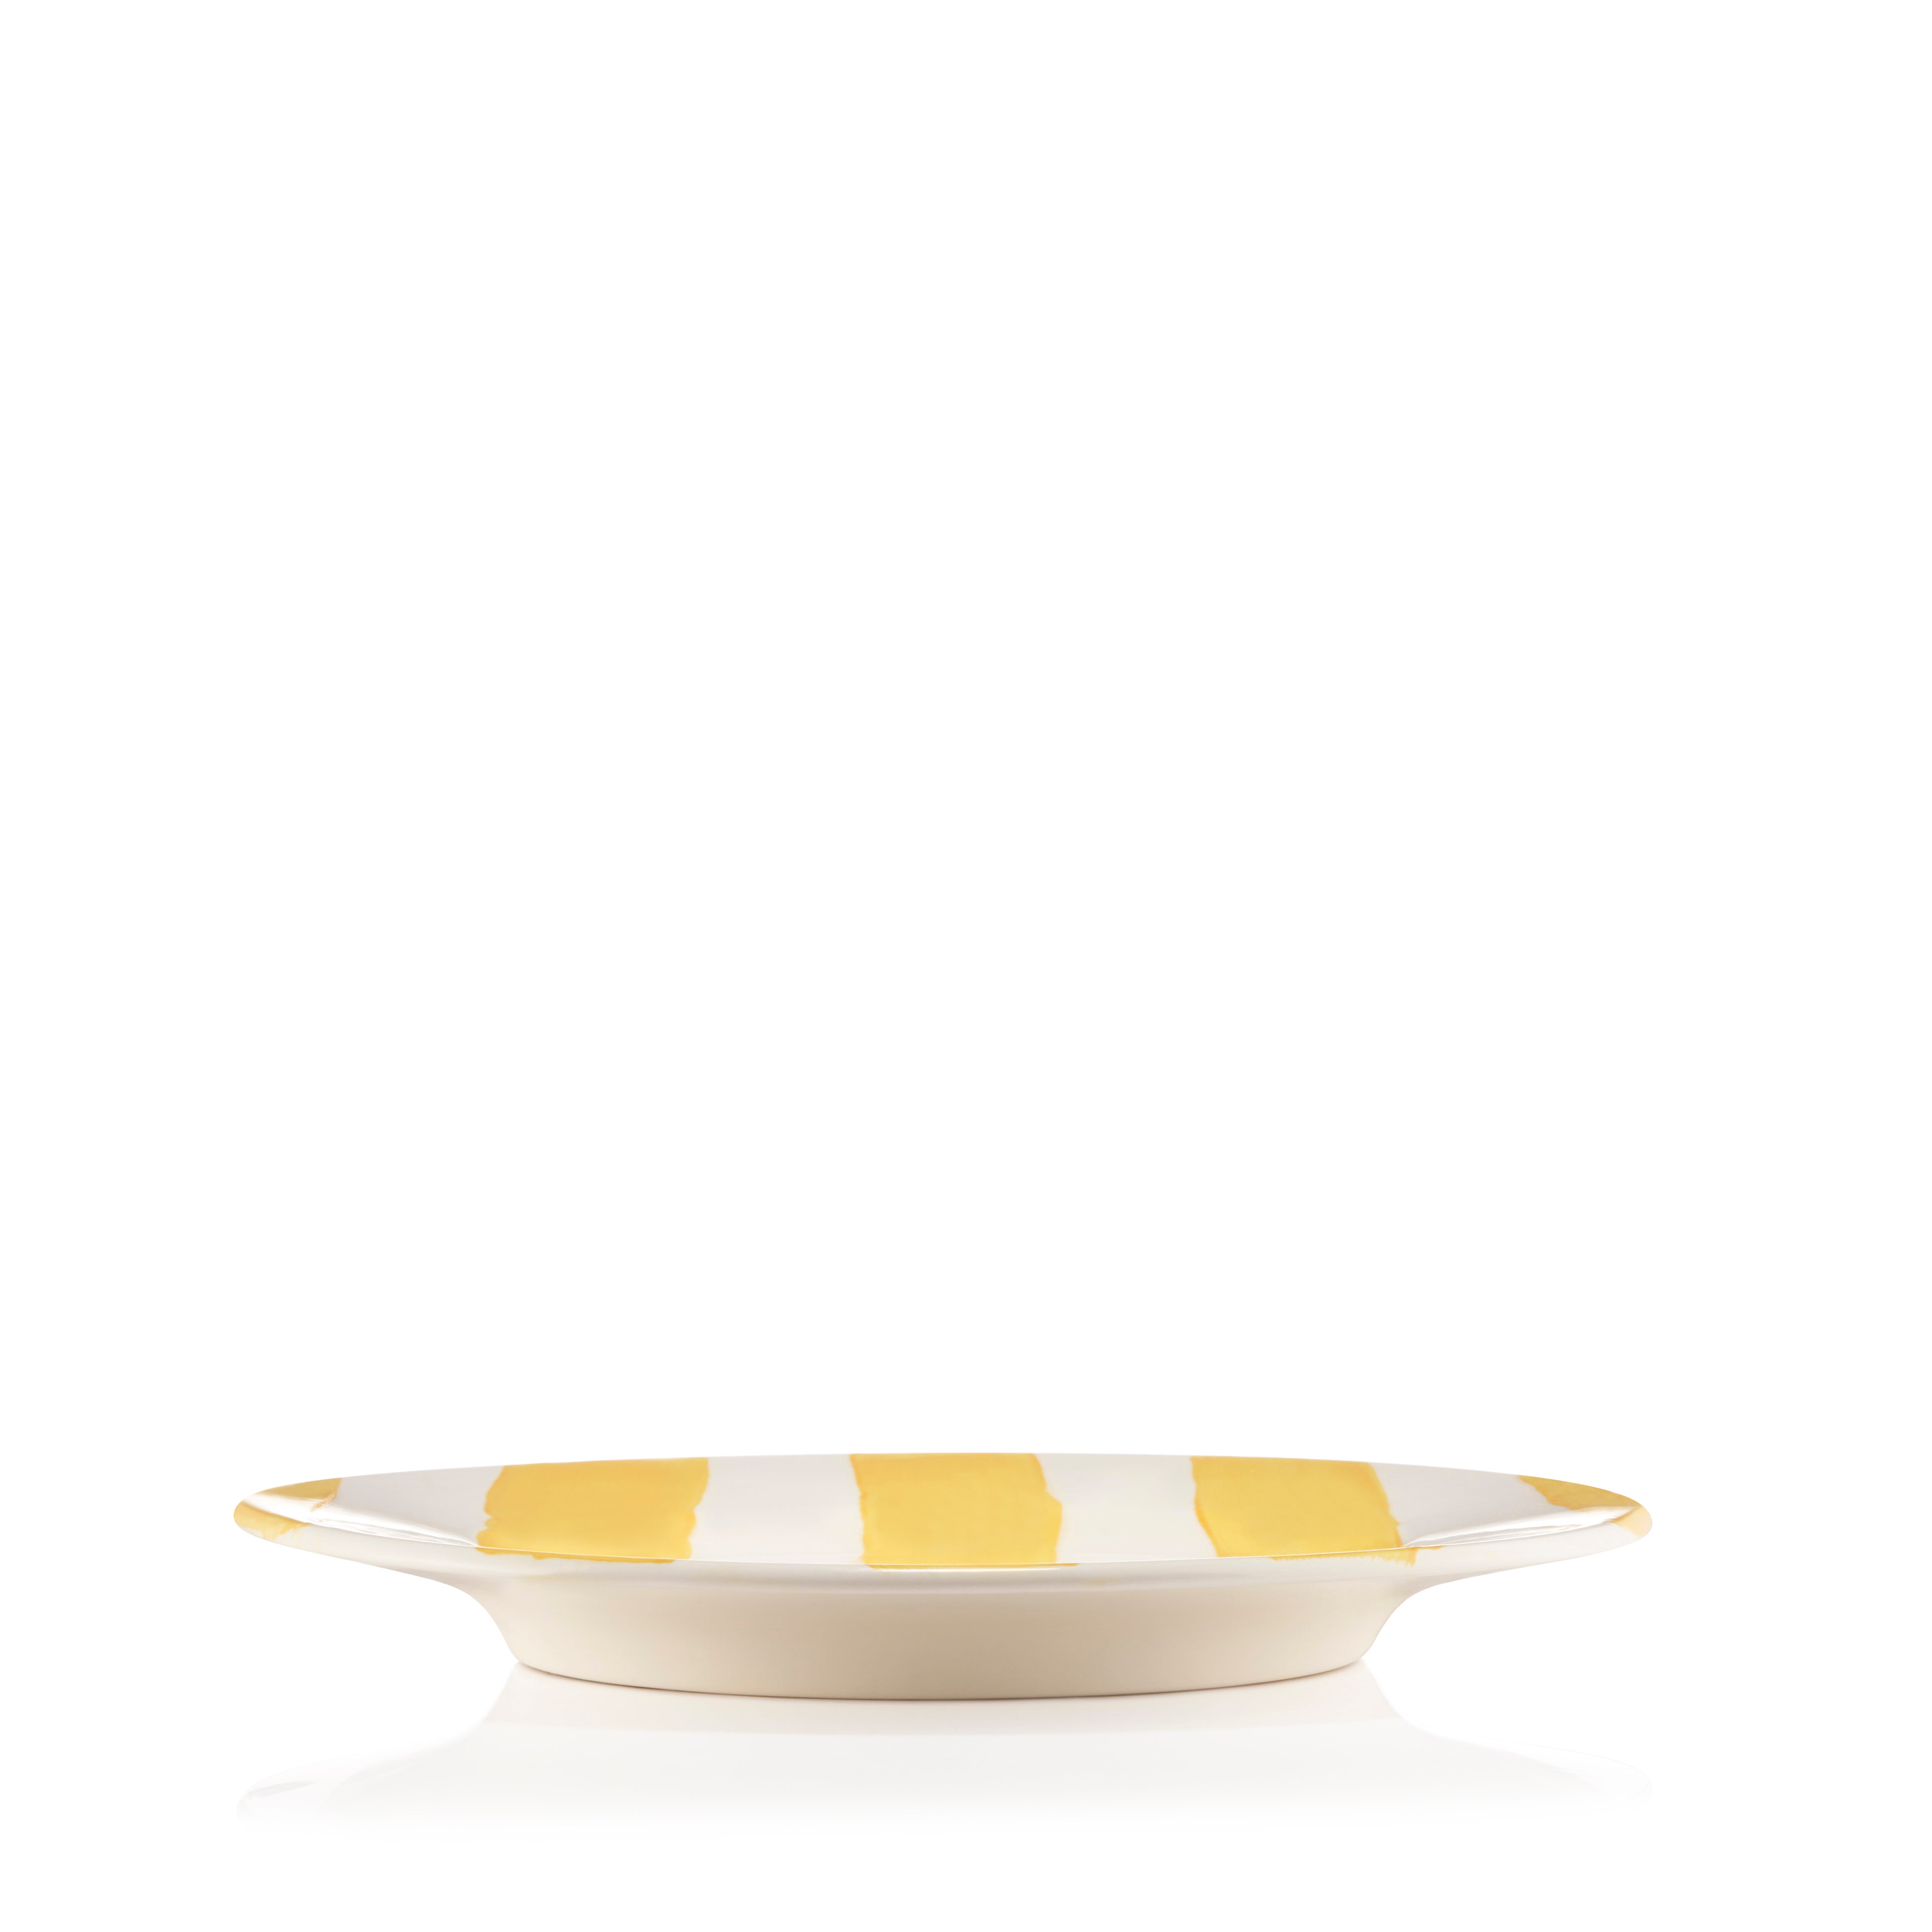 S&B Classic Stripe Dinner Plate in Yellow and White